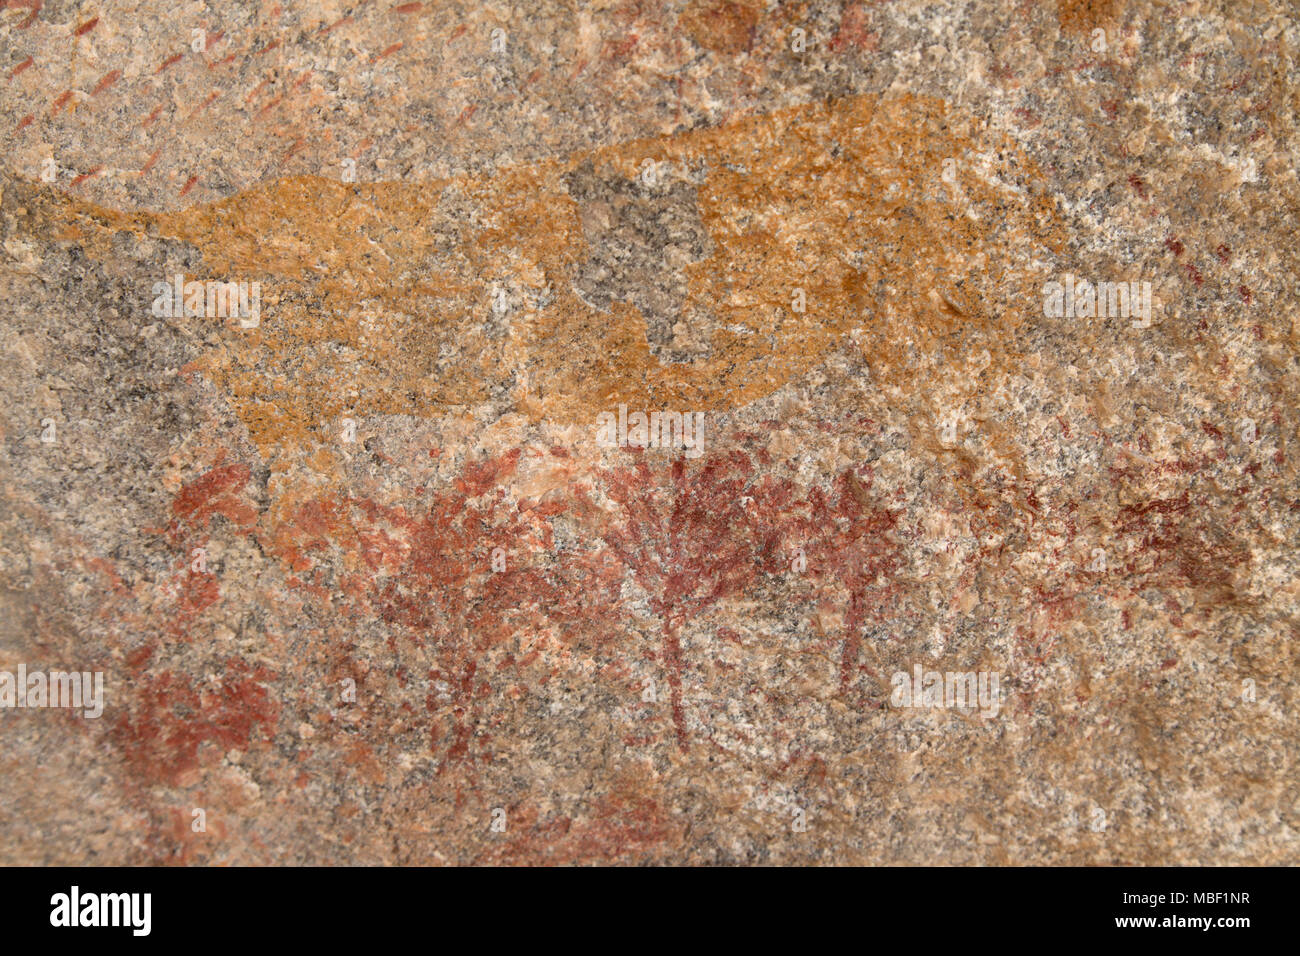 Ancient rock art at Matobo National Park in Zimbabwe. The painting depicts an animal and trees. Stock Photo